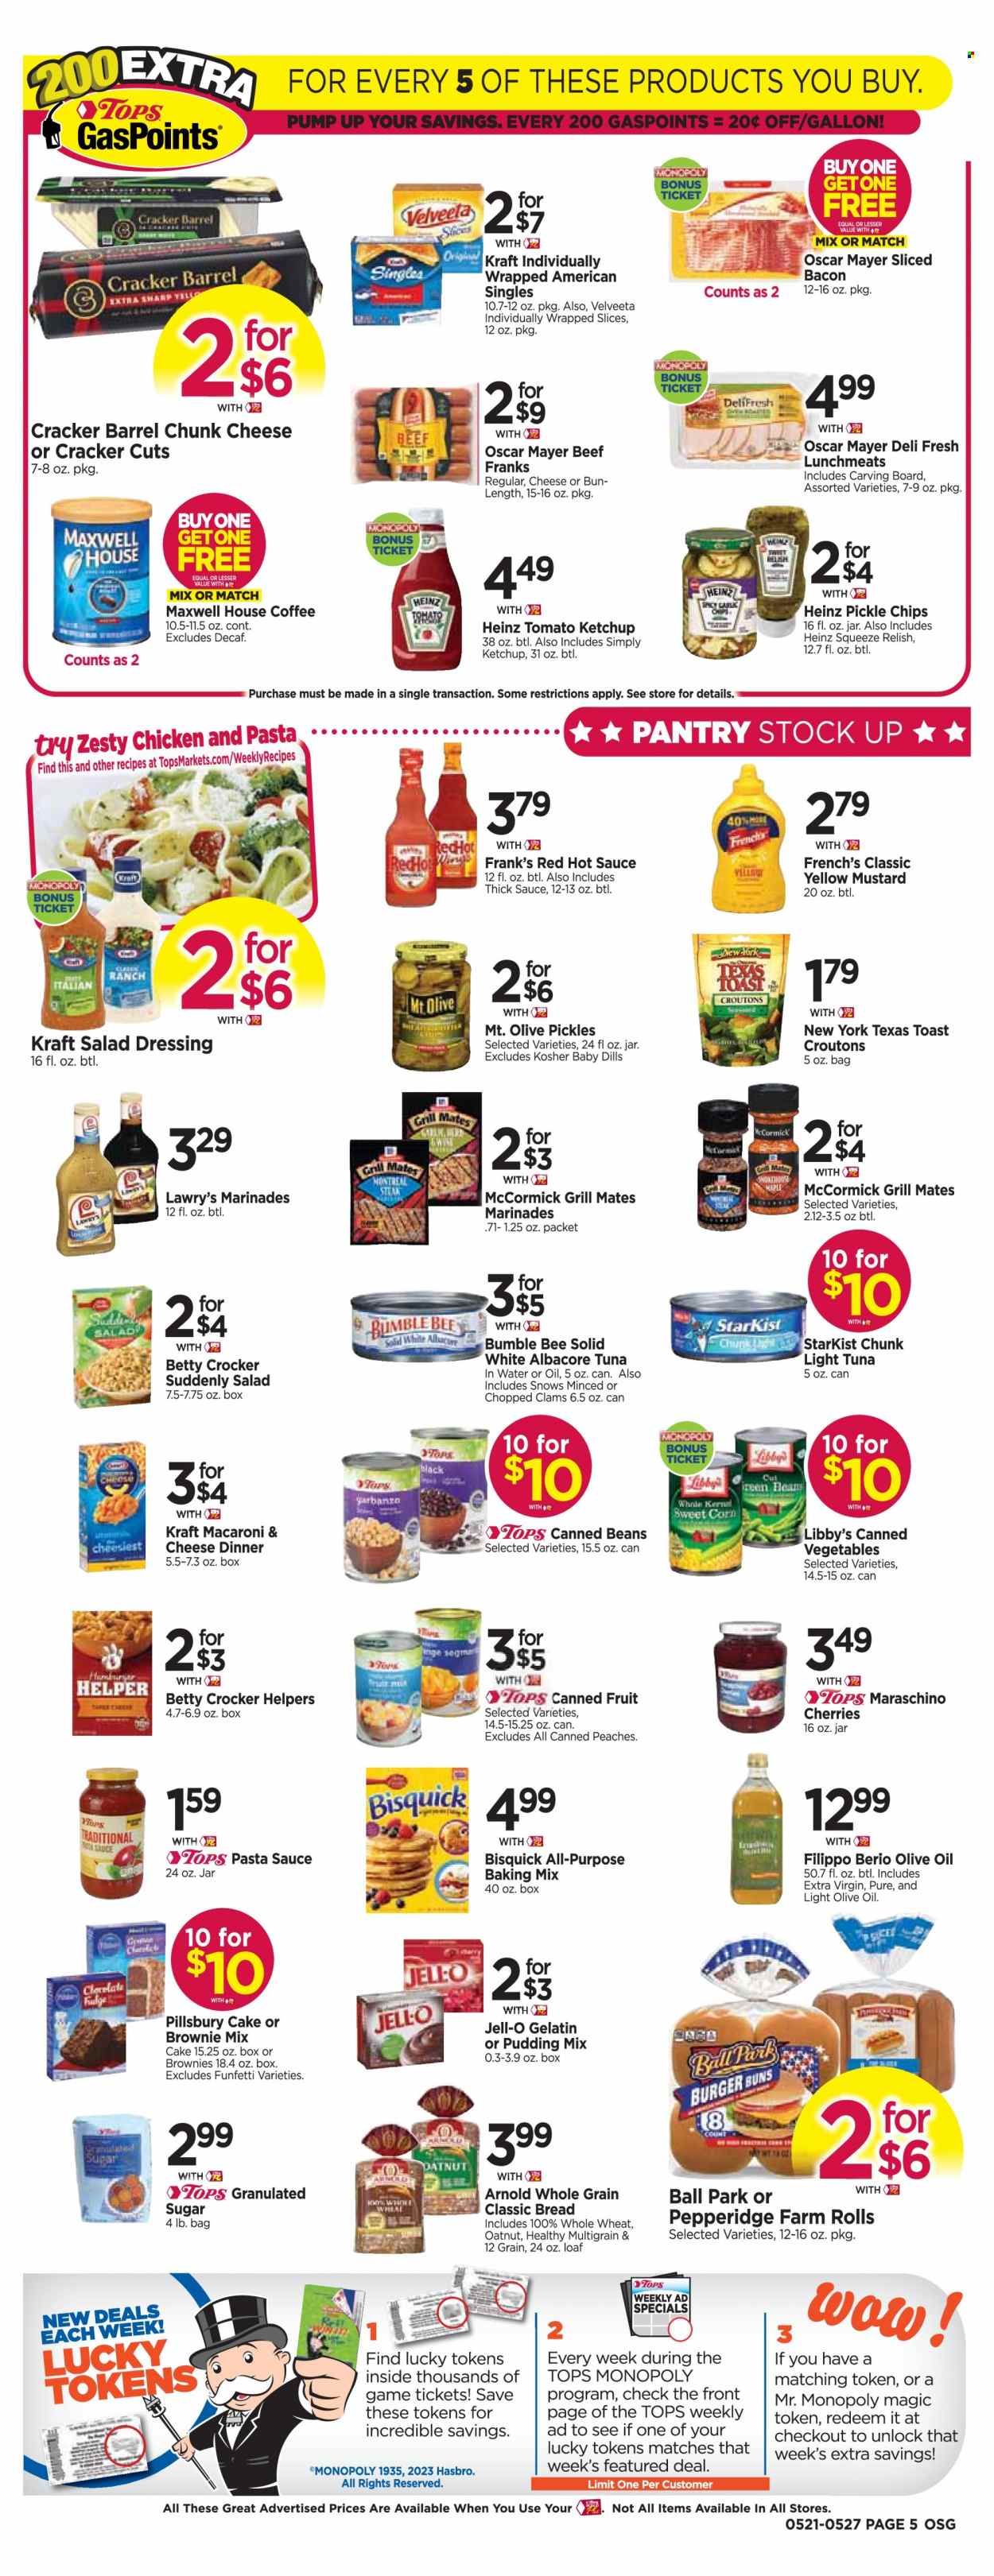 thumbnail - Tops Flyer - 05/21/2023 - 05/27/2023 - Sales products - bread, cake, burger buns, brownie mix, corn, garlic, sweet corn, peaches, clams, tuna, StarKist, macaroni & cheese, pasta sauce, Bumble Bee, Pillsbury, Kraft®, bacon, Oscar Mayer, frankfurters, lunch meat, chunk cheese, pudding, fudge, crackers, chips, Bisquick, croutons, granulated sugar, sugar, Jell-O, baking mix, canned tuna, tuna in water, Heinz, pickles, canned vegetables, light tuna, Maraschino cherries, canned fruit, mustard, salad dressing, hot sauce, ketchup, dressing, extra virgin olive oil, olive oil, Maxwell House, coffee, chicken, steak. Page 7.